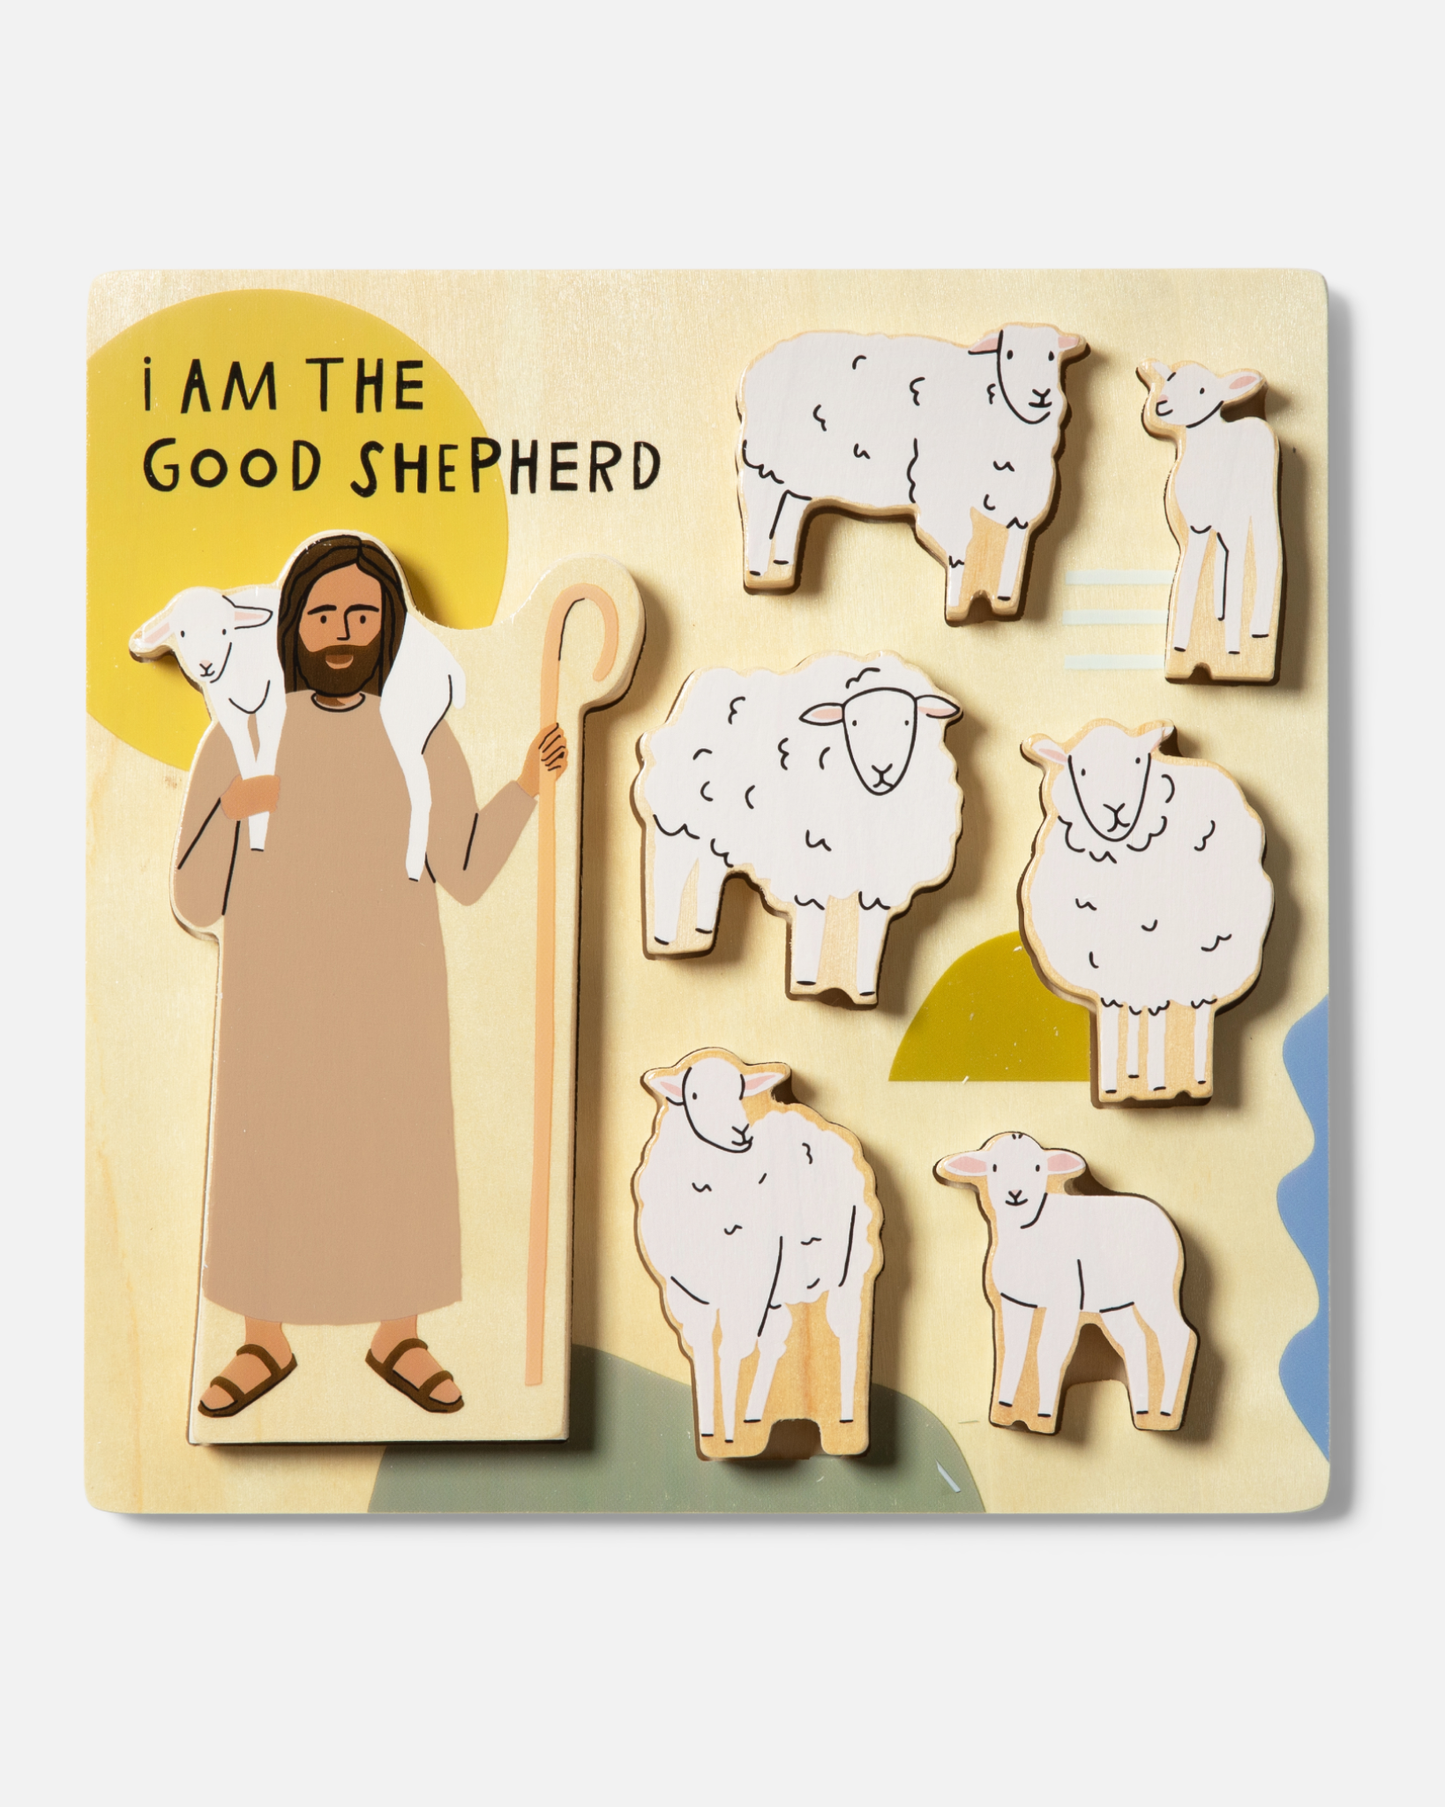 Be A Heart - Wooden Puzzle | Catholic Puzzle For Kids | Kids Toy: Good Shepherd